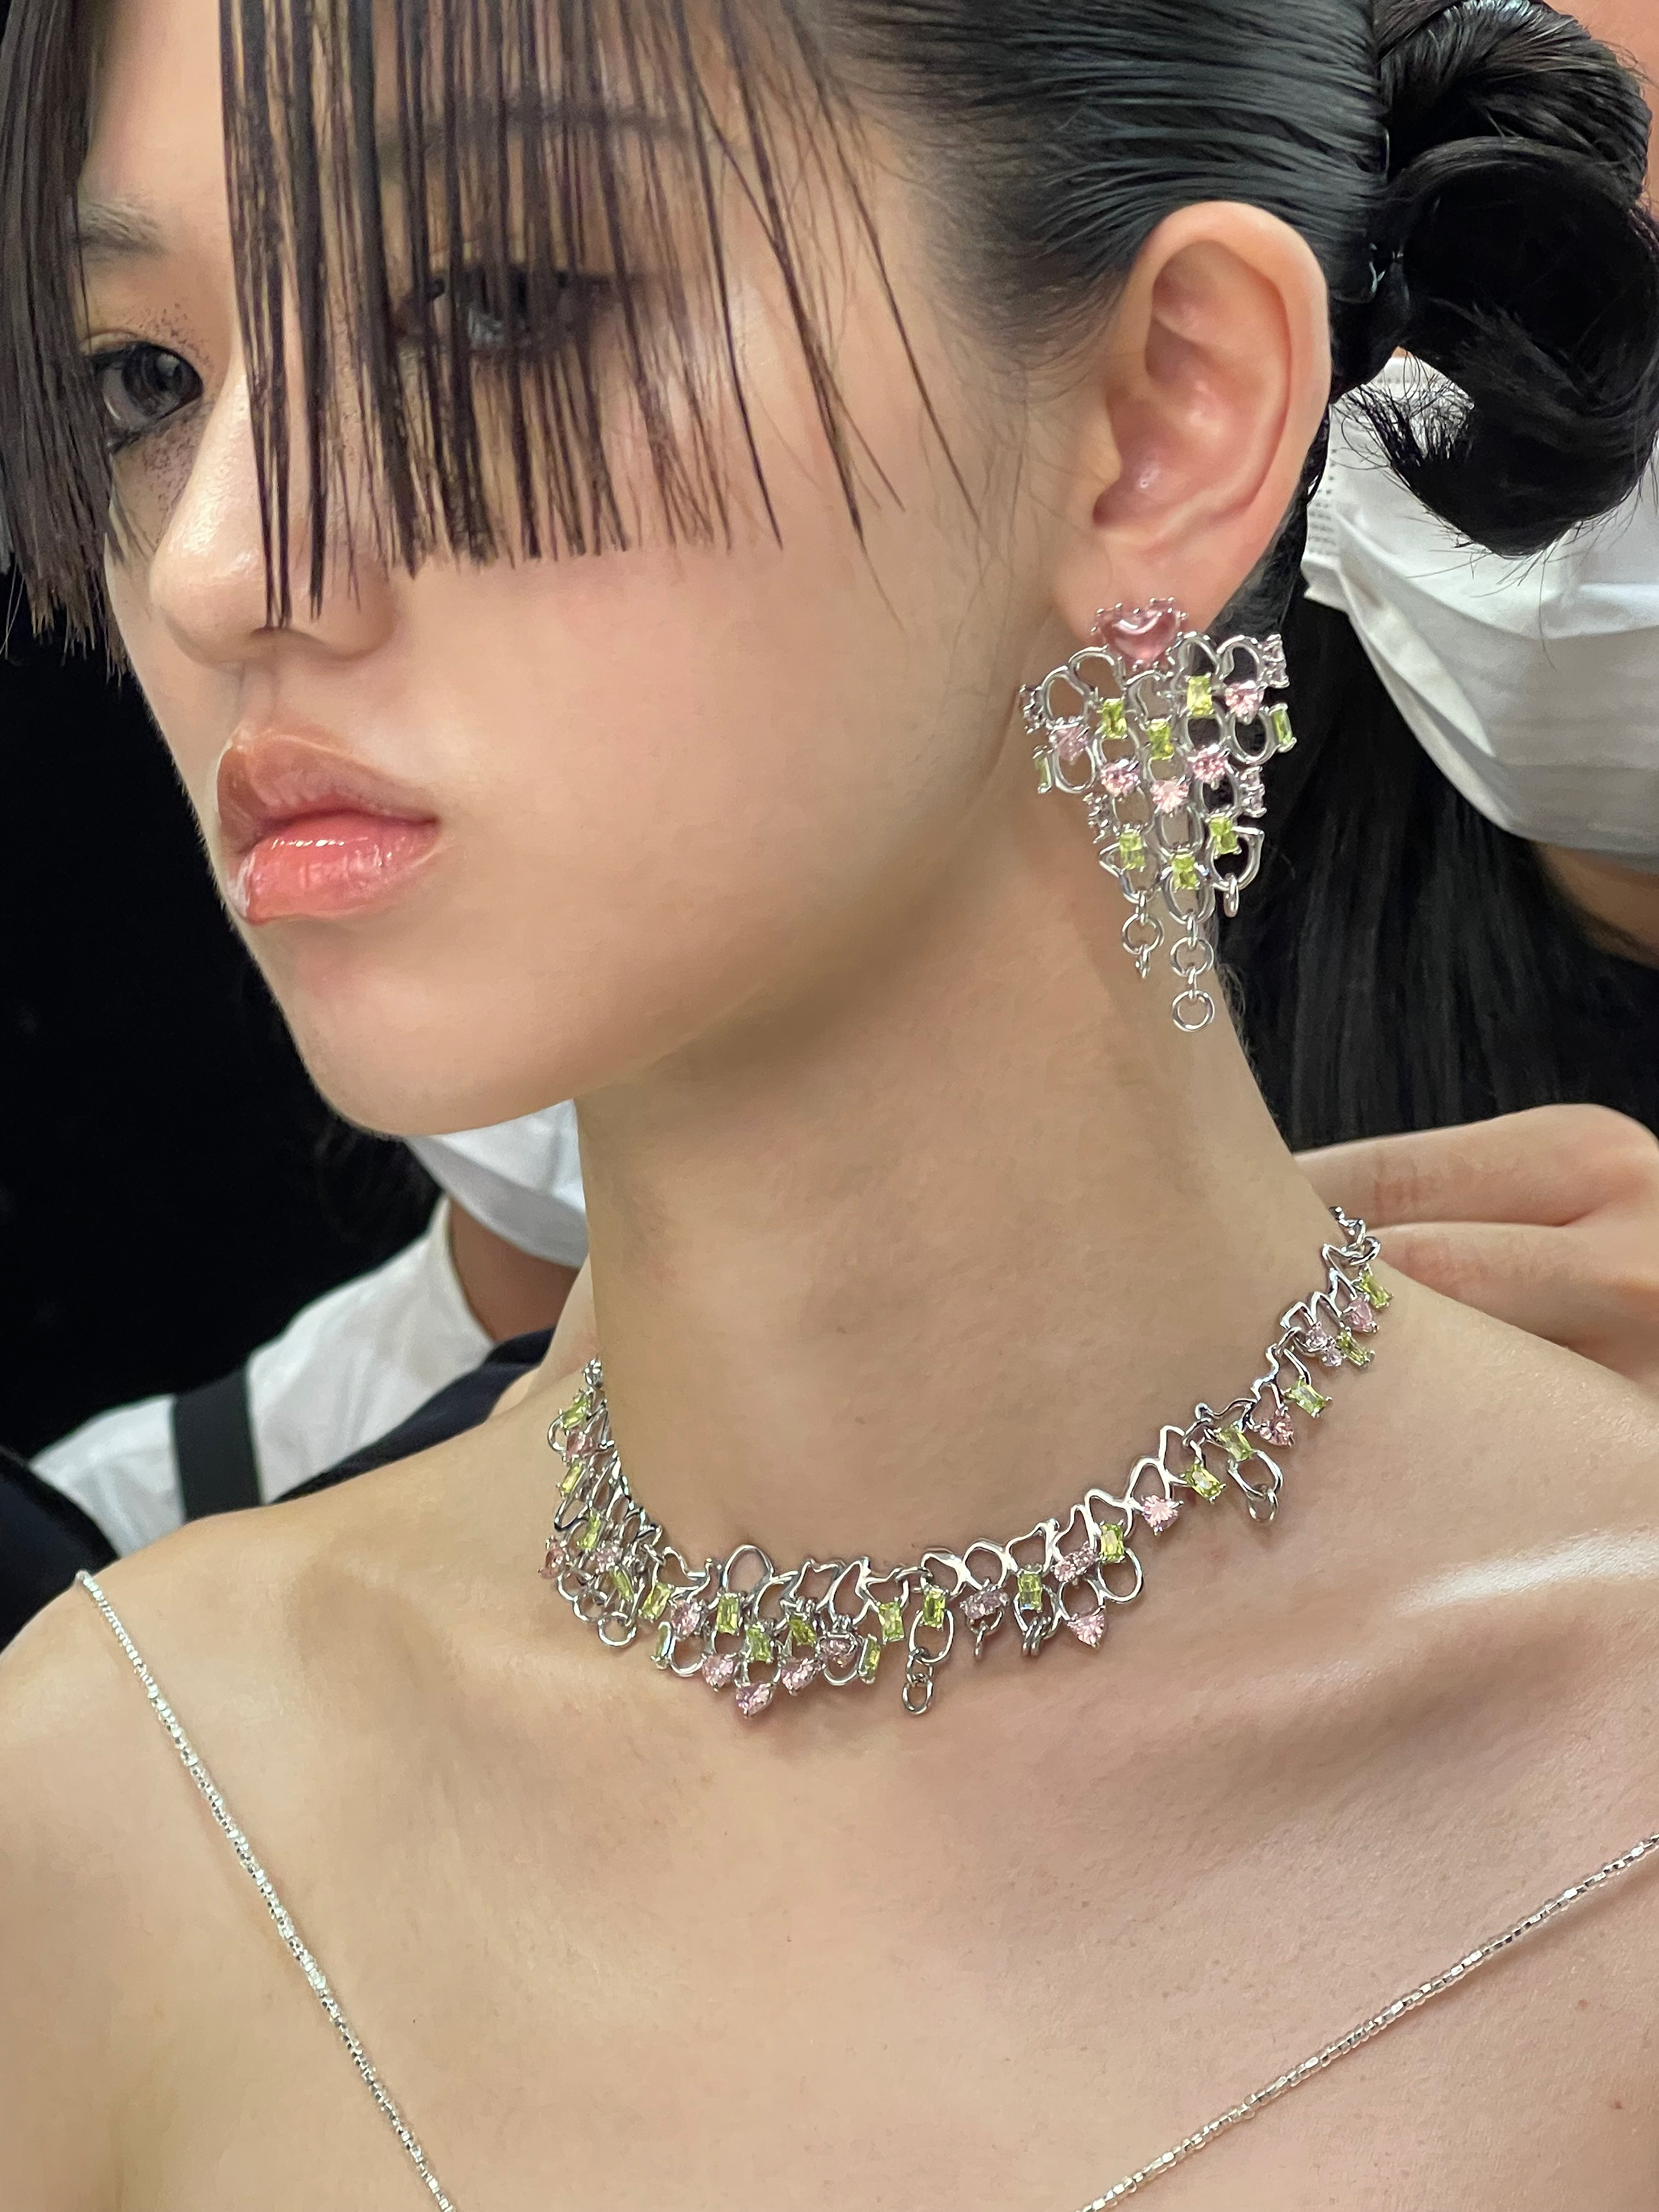 a model wearing a silver jewelled necklace and earrings by yvmin